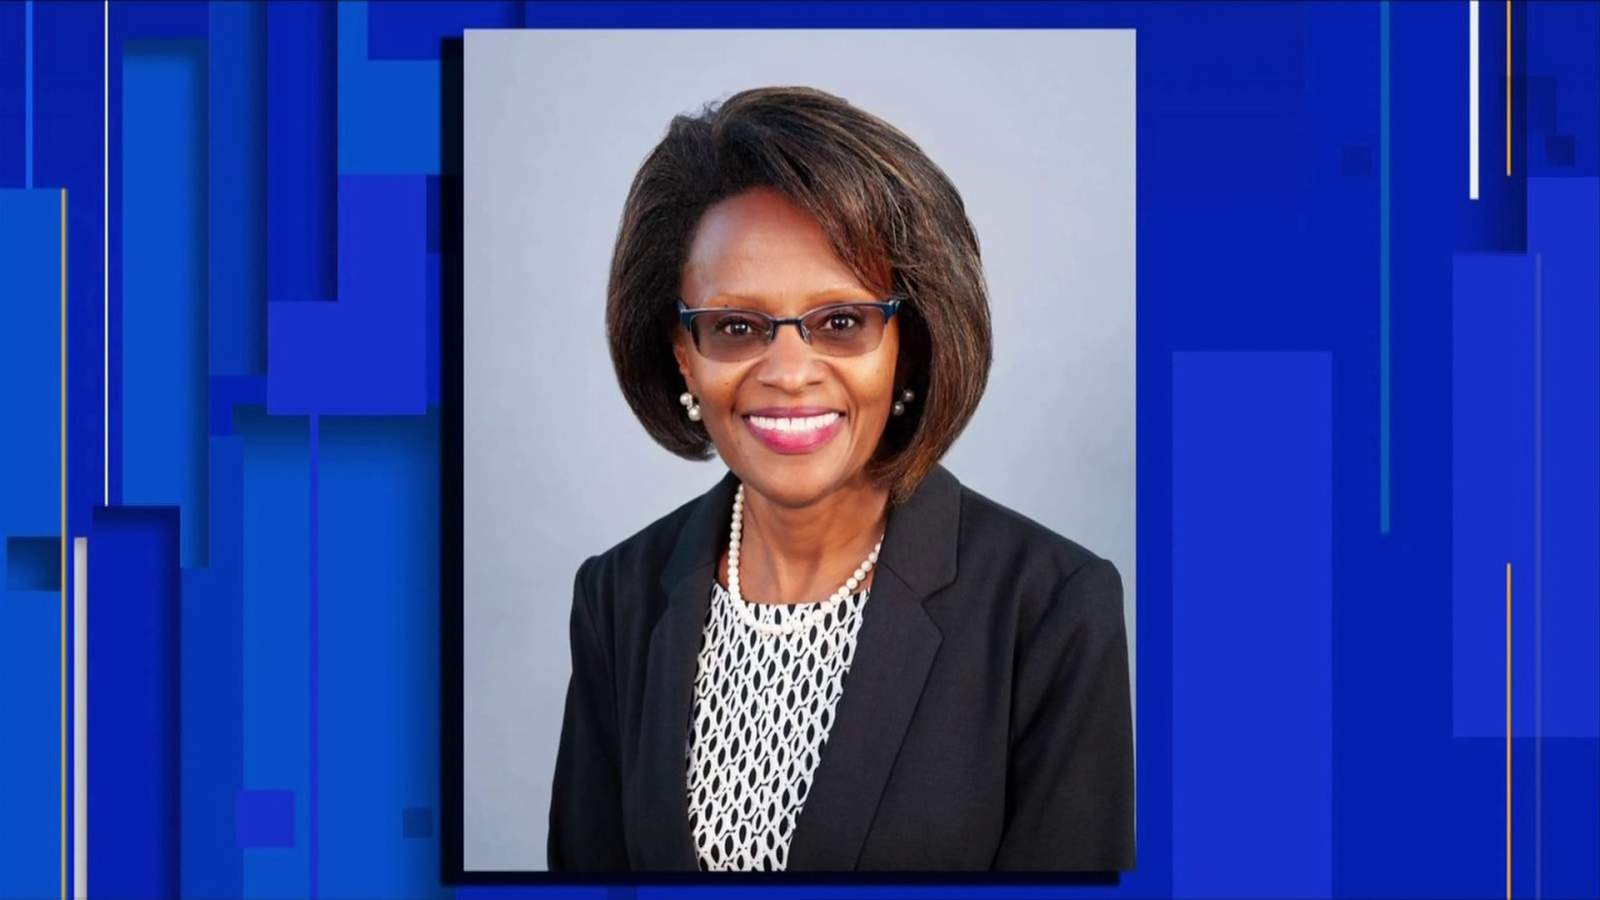 Franklin County Public Schools welcomes first Black superintendent